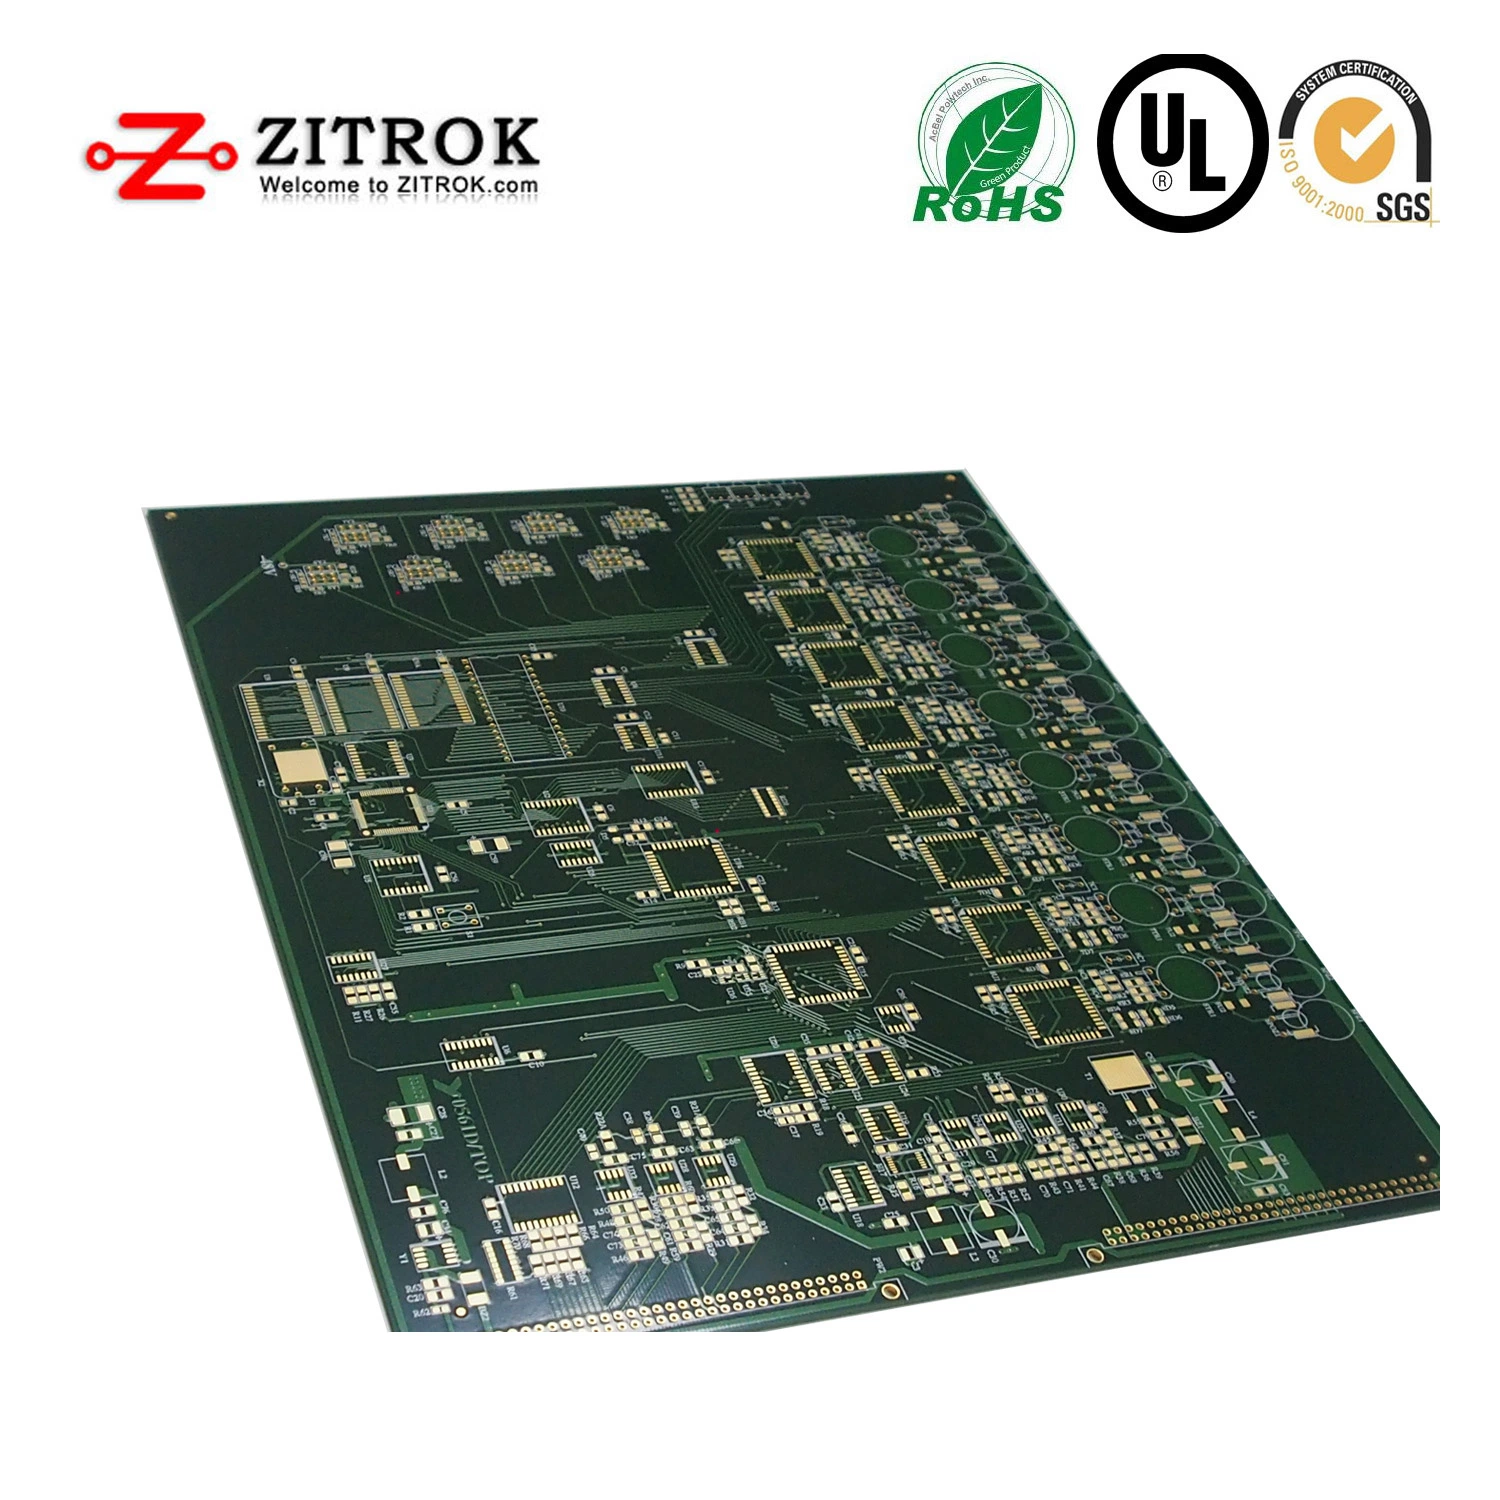 Custom Rogers 4003 RF PCB Supplier, High Frequency Printed Circuit Board EMS PCB Manufacturing